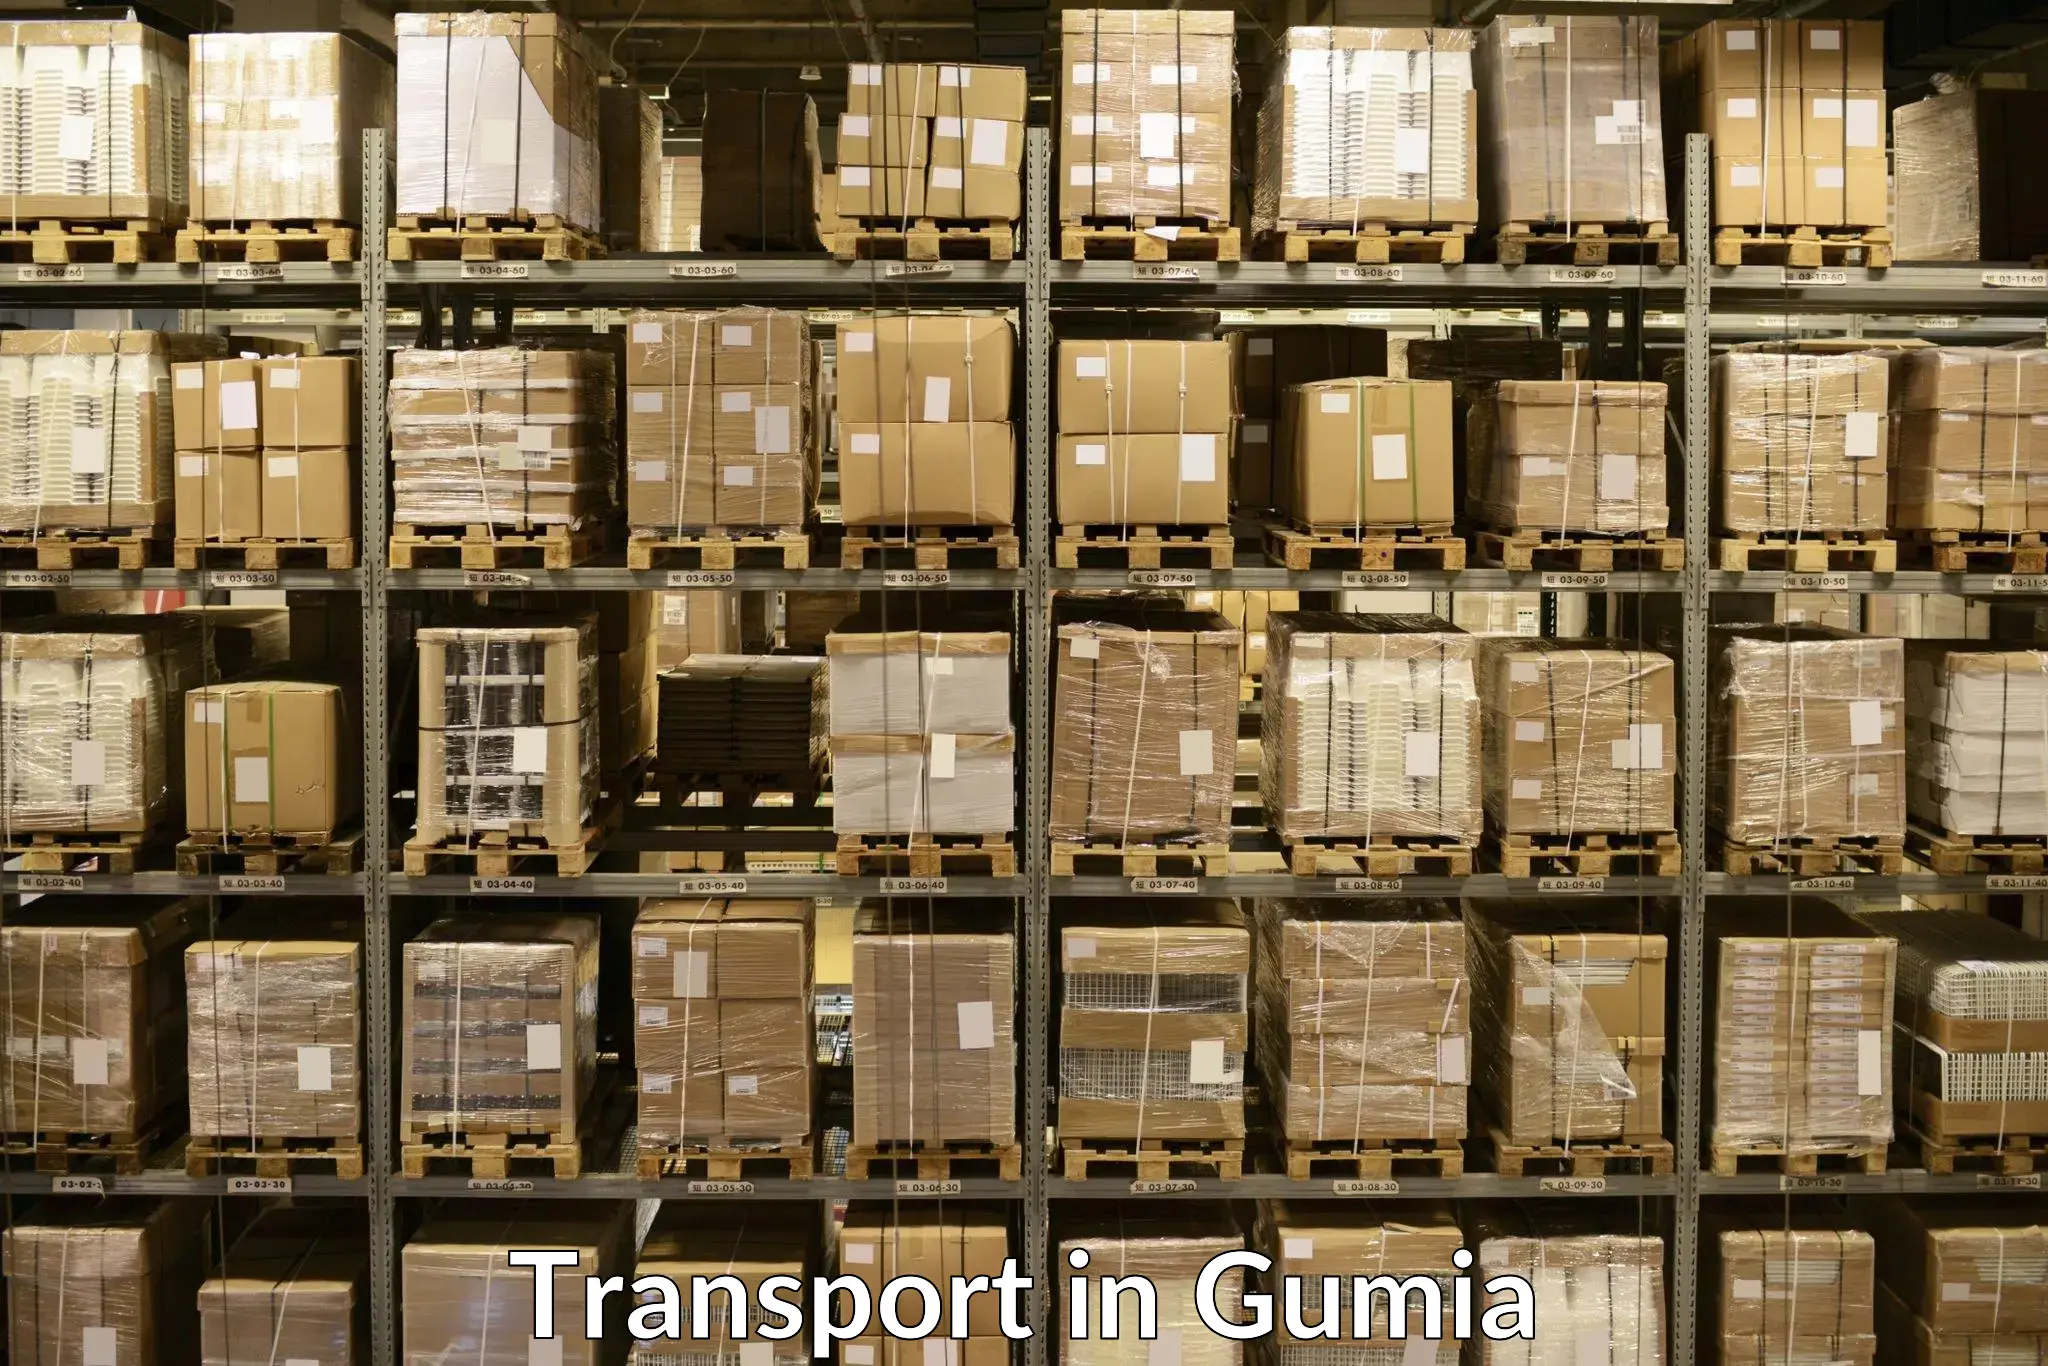 Express transport services in Gumia